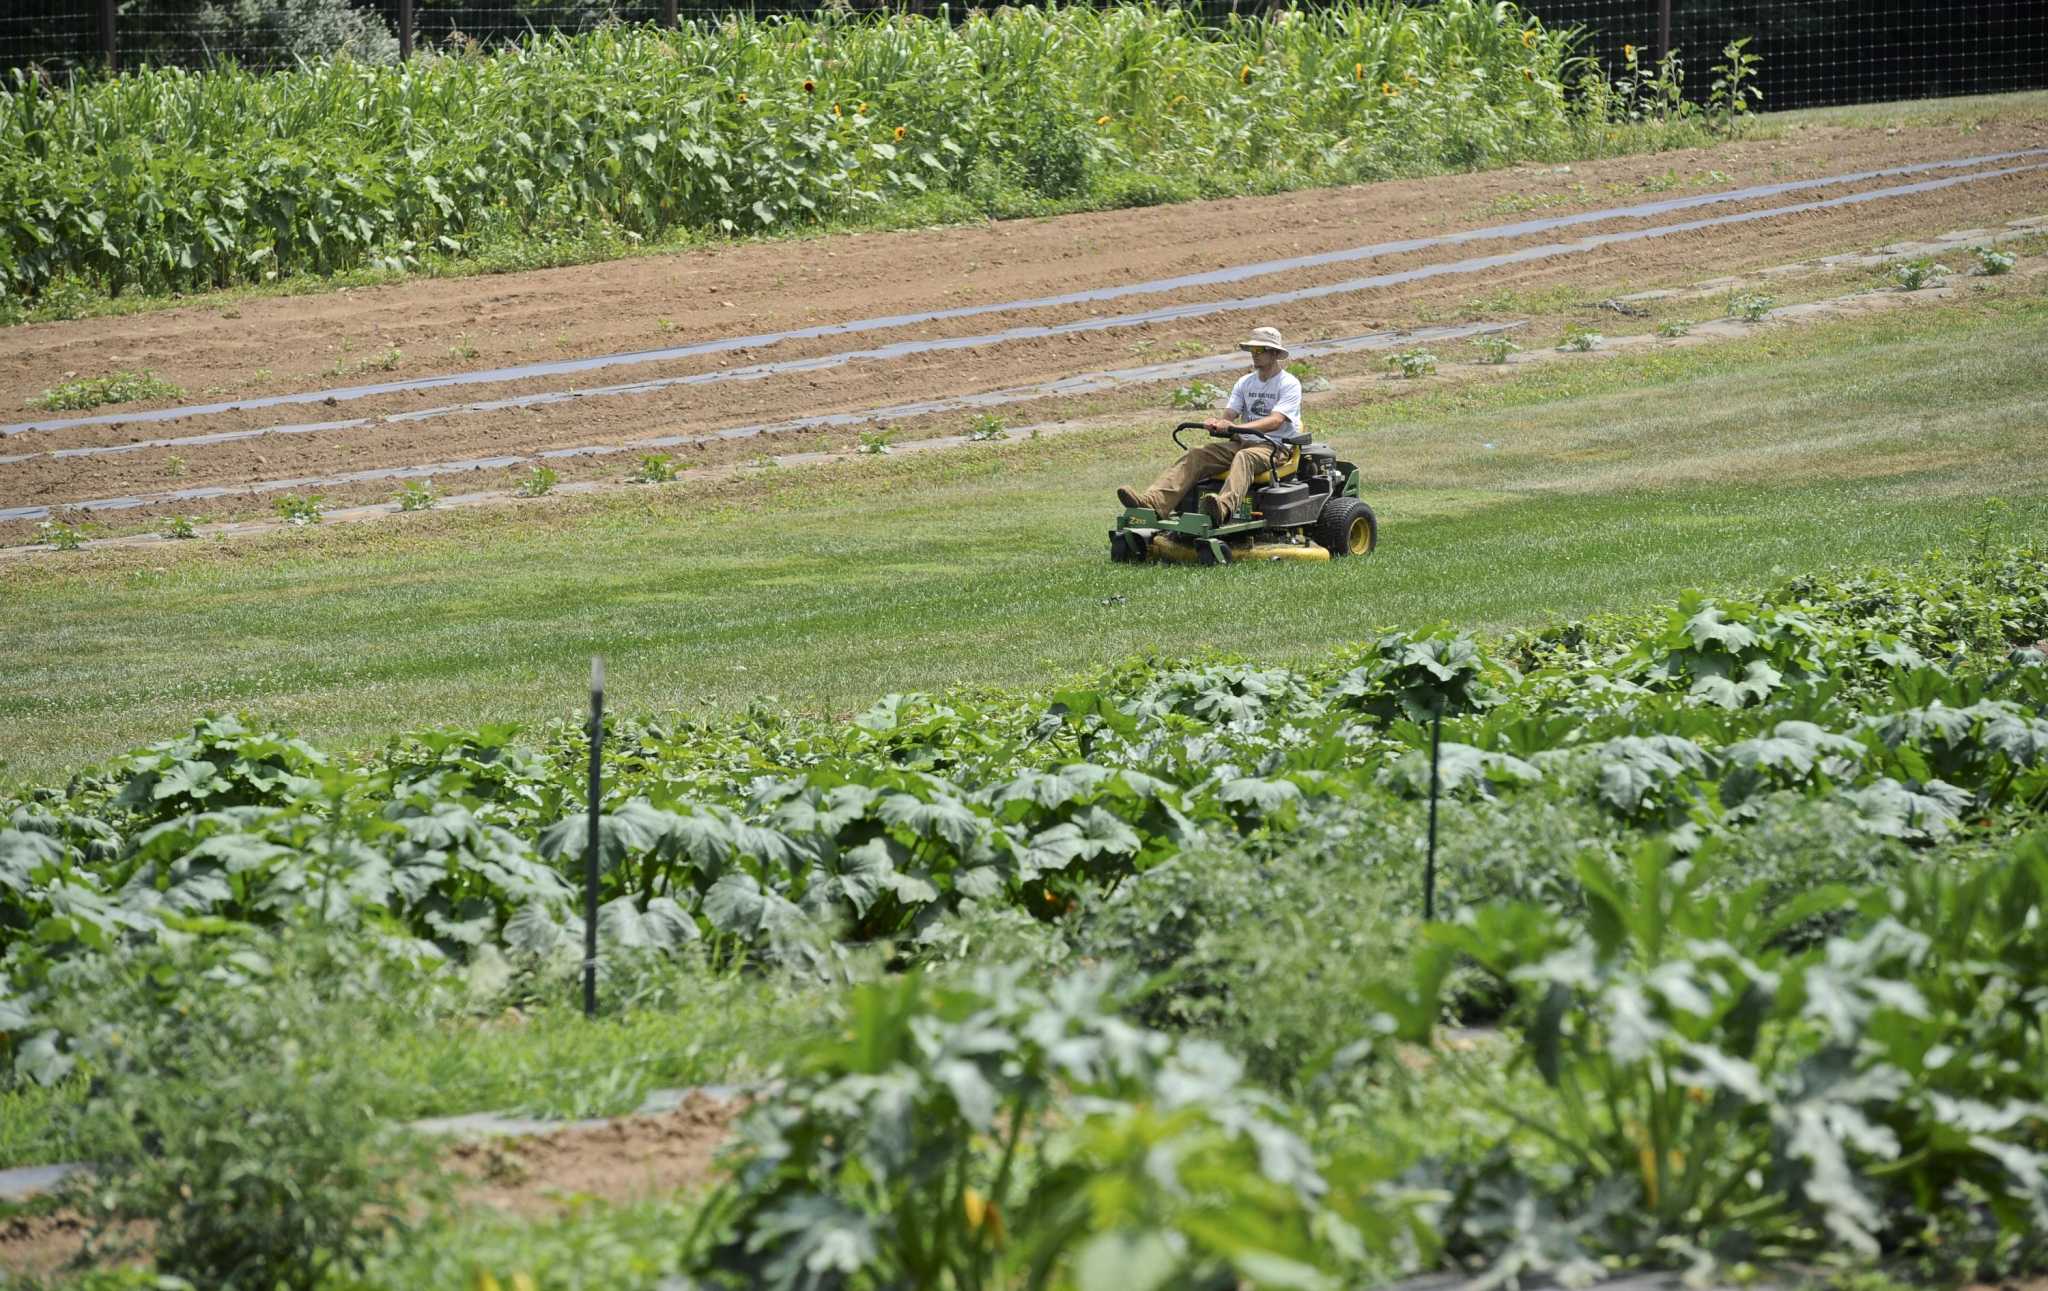 Group wants New Milford to join ‘Greenwave Movement’ to educate about farming, healthy agriculture